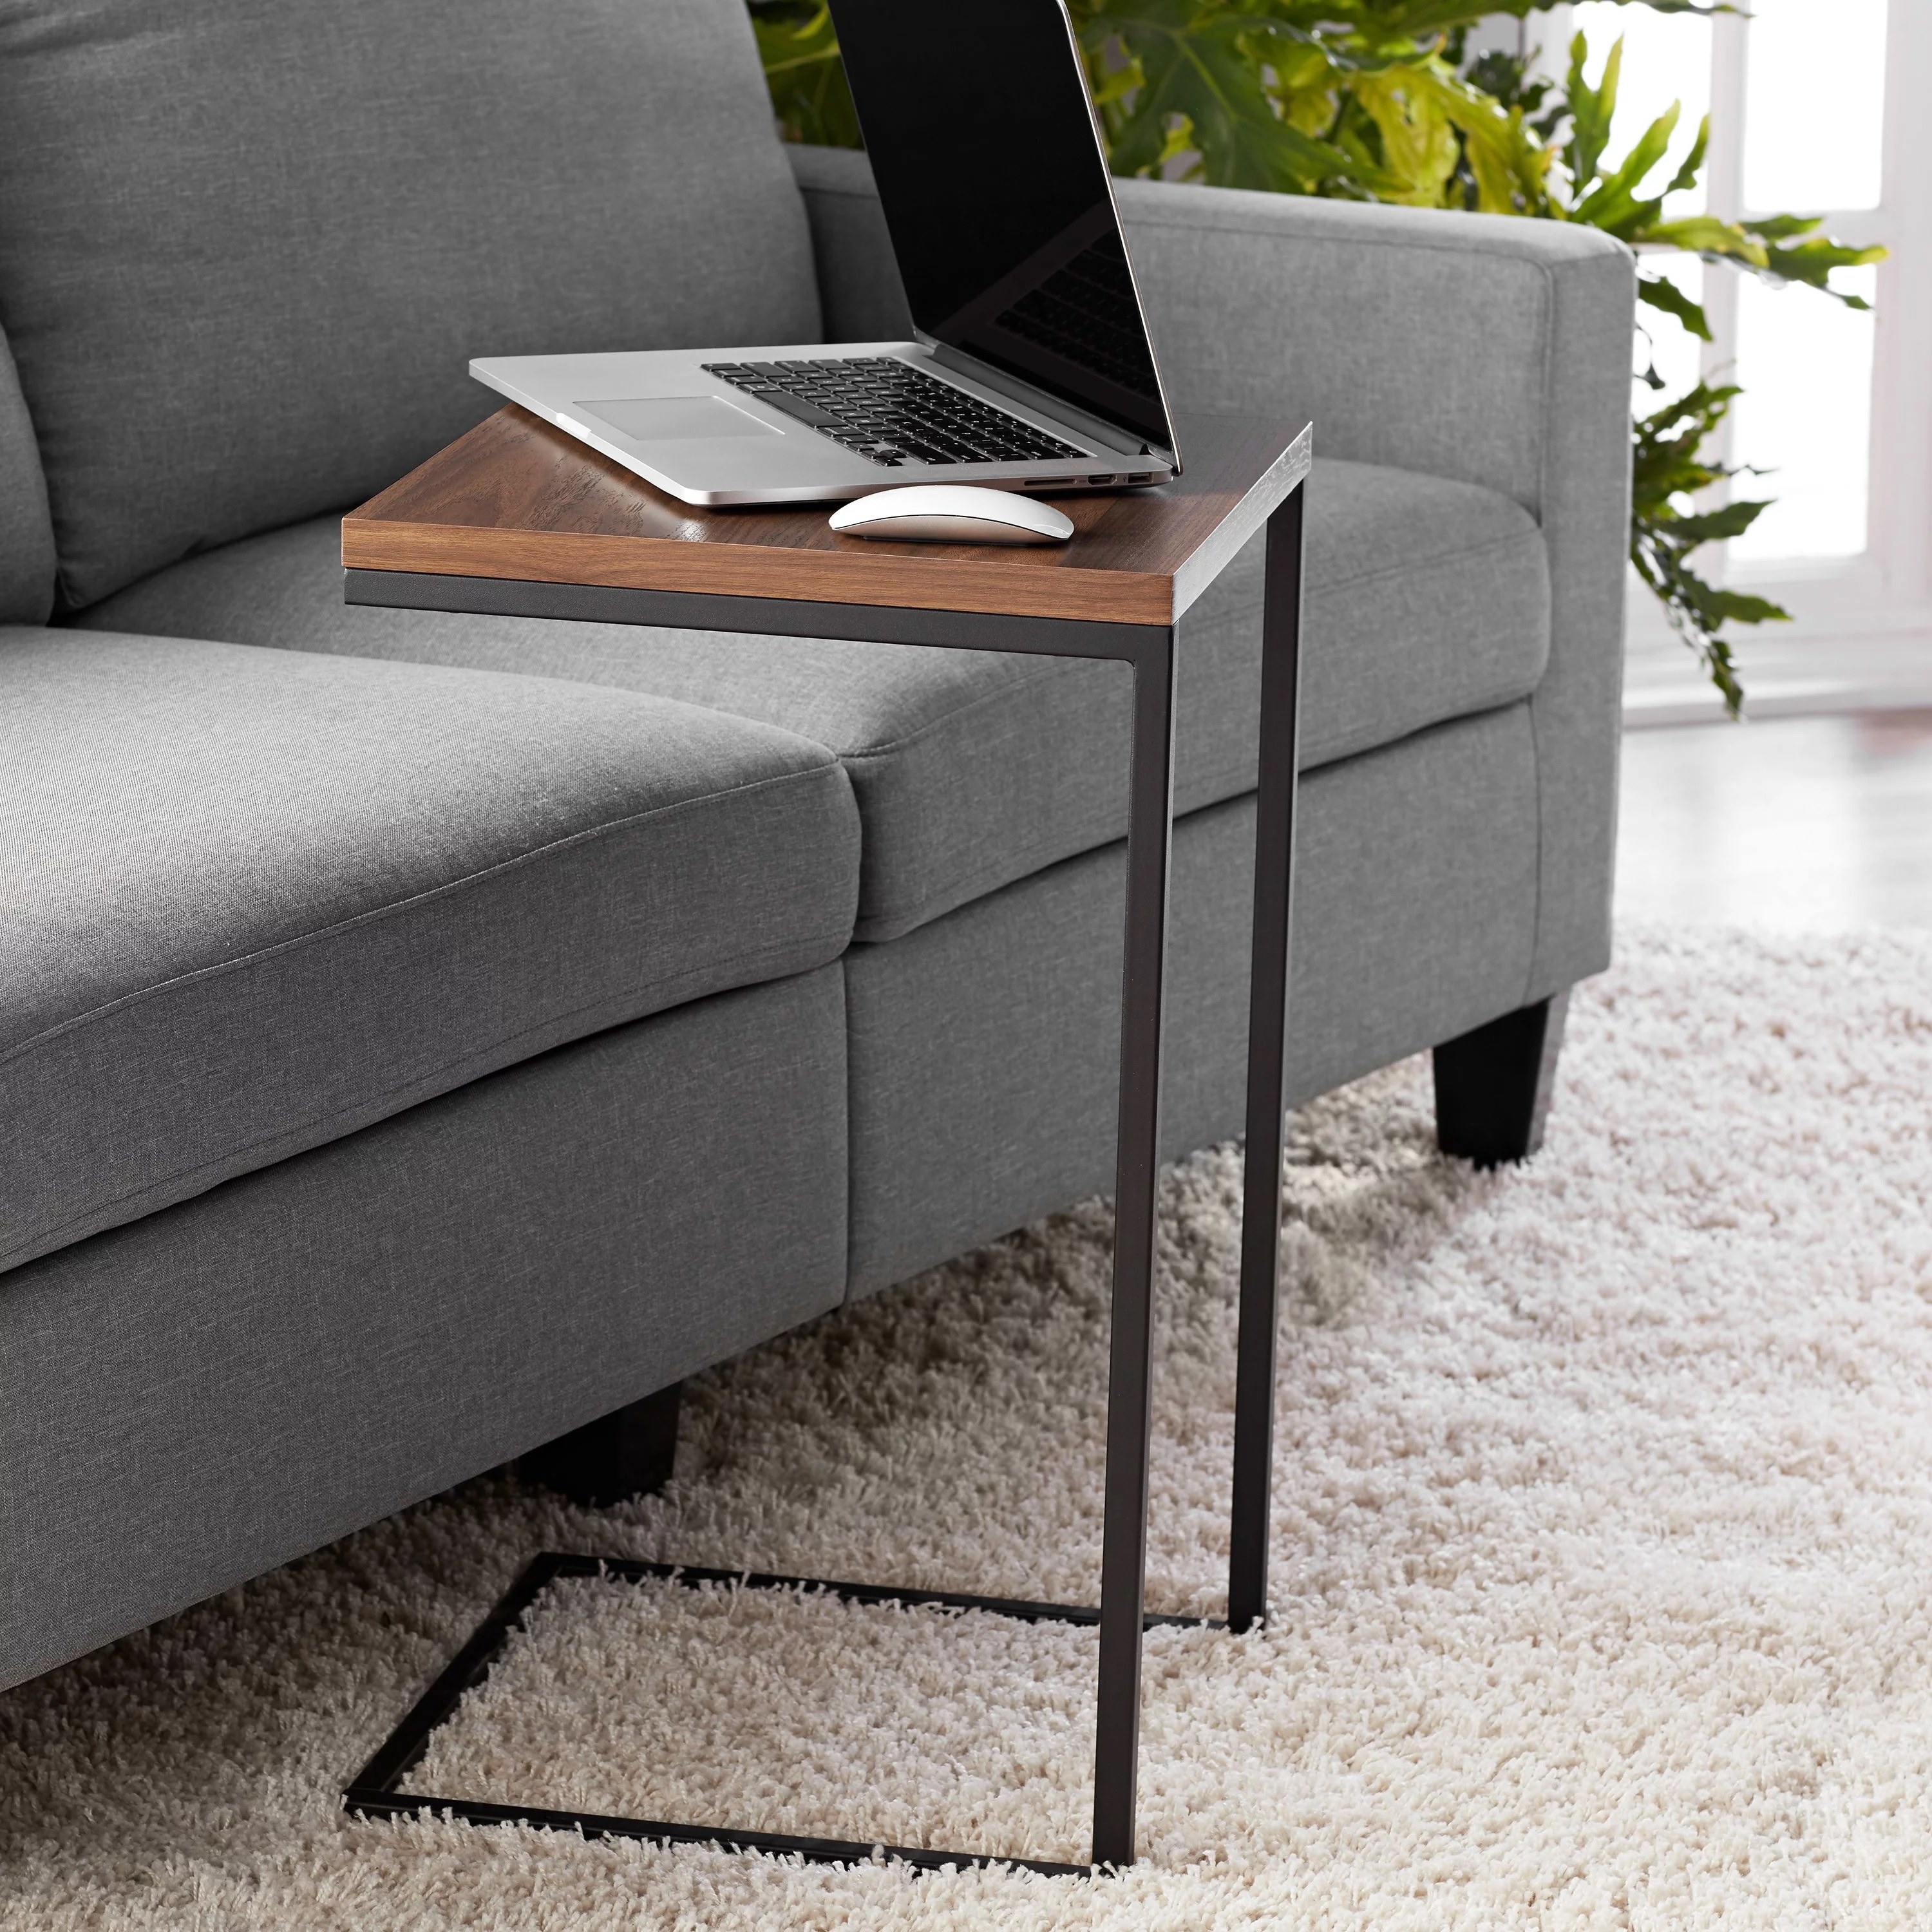 The C-shaped end table next to the couch with a laptop on it